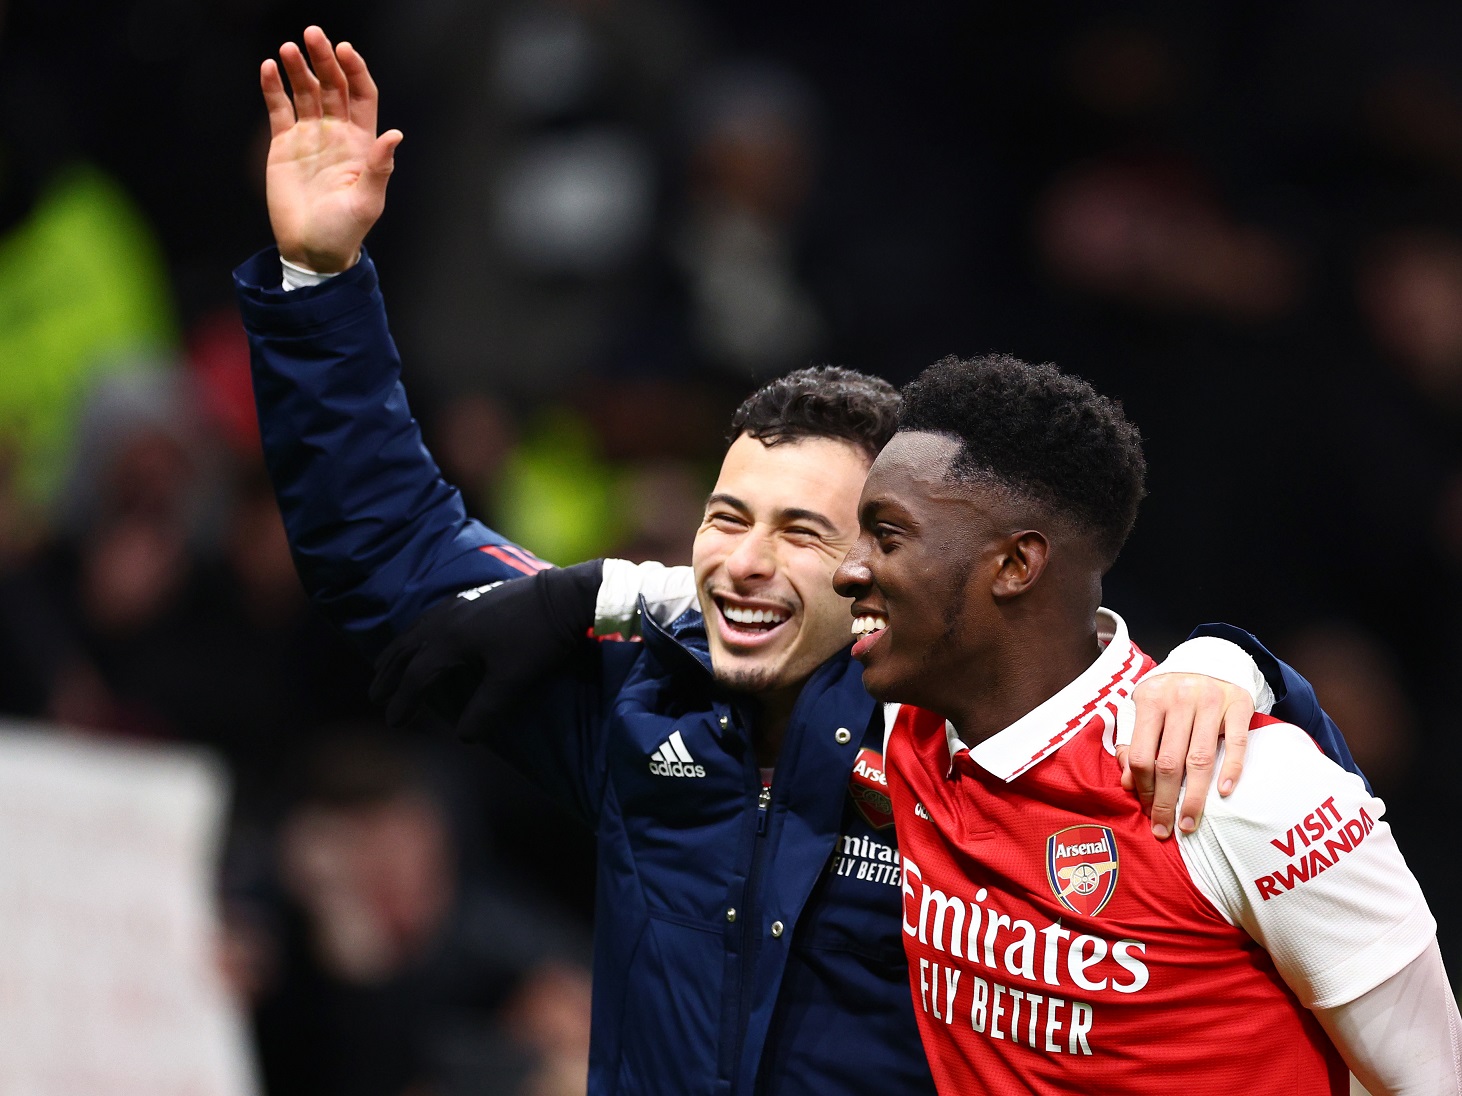 Forget Neville – Arsenal just need to treat every game like a Cup Final – Starting against Everton